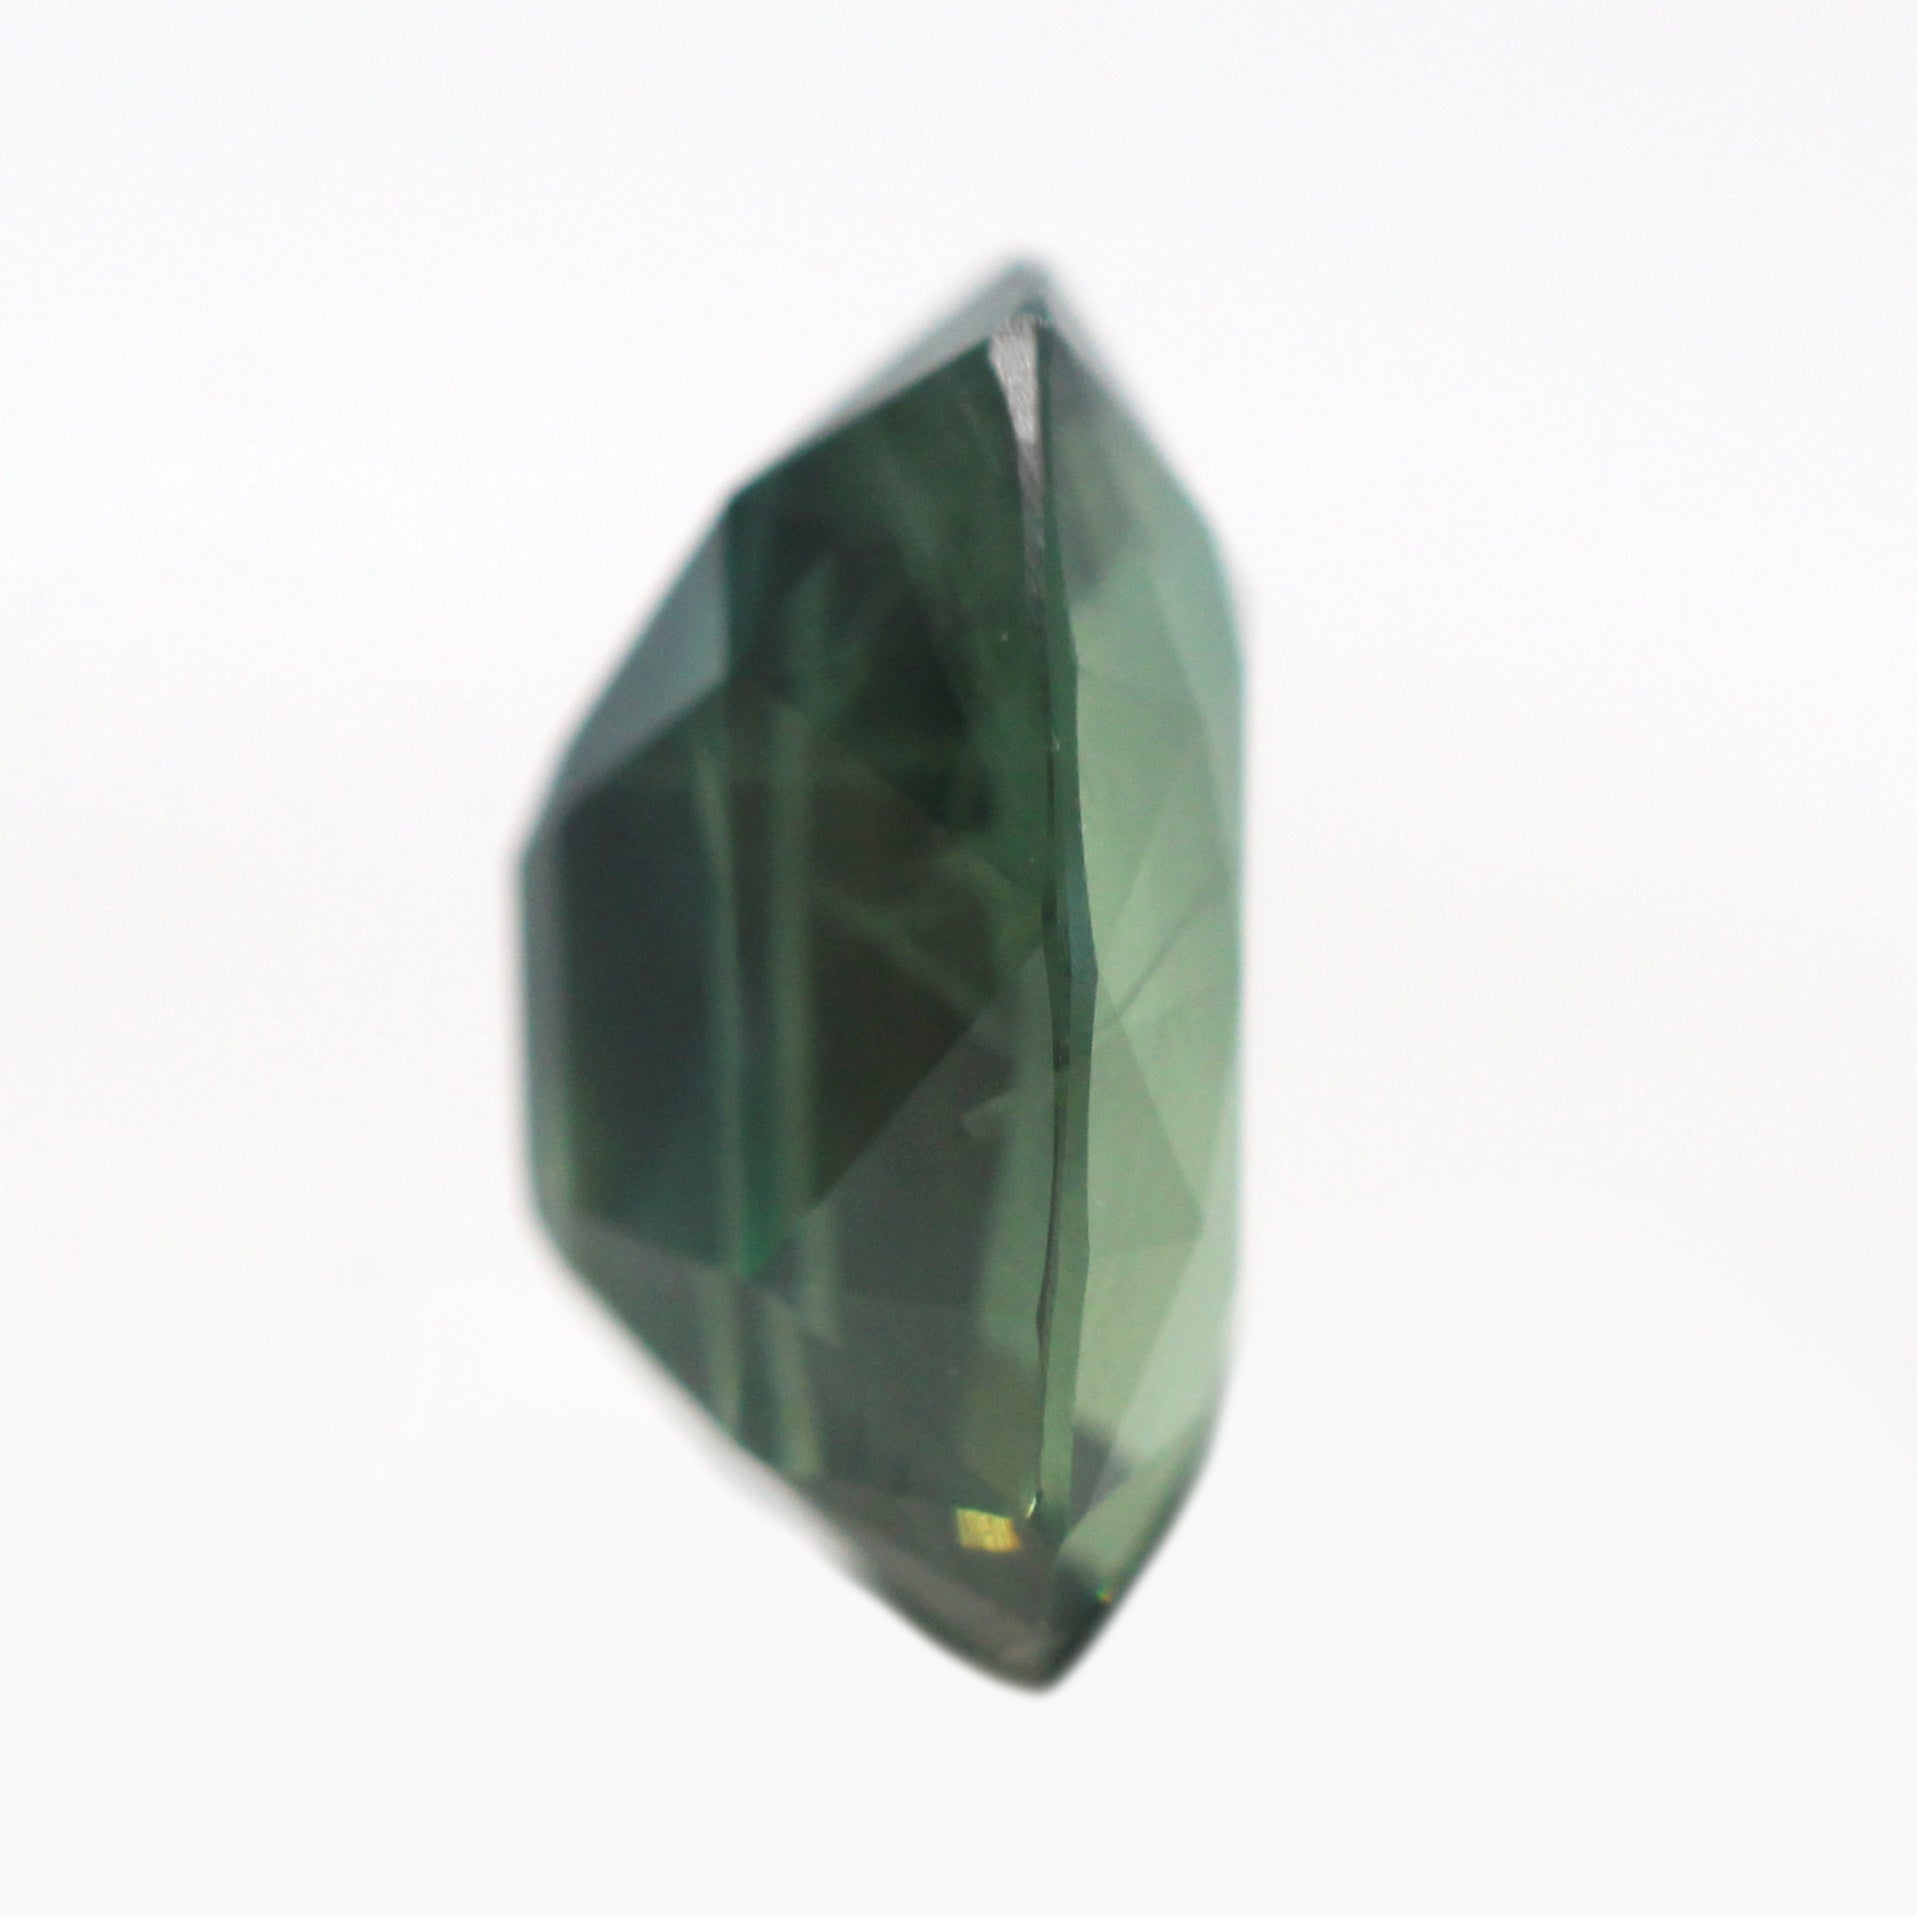 1.38 Carat Elongated Cushion Cut Teal Green Sapphire for Custom Work - Inventory Code TGCS138 - Midwinter Co. Alternative Bridal Rings and Modern Fine Jewelry